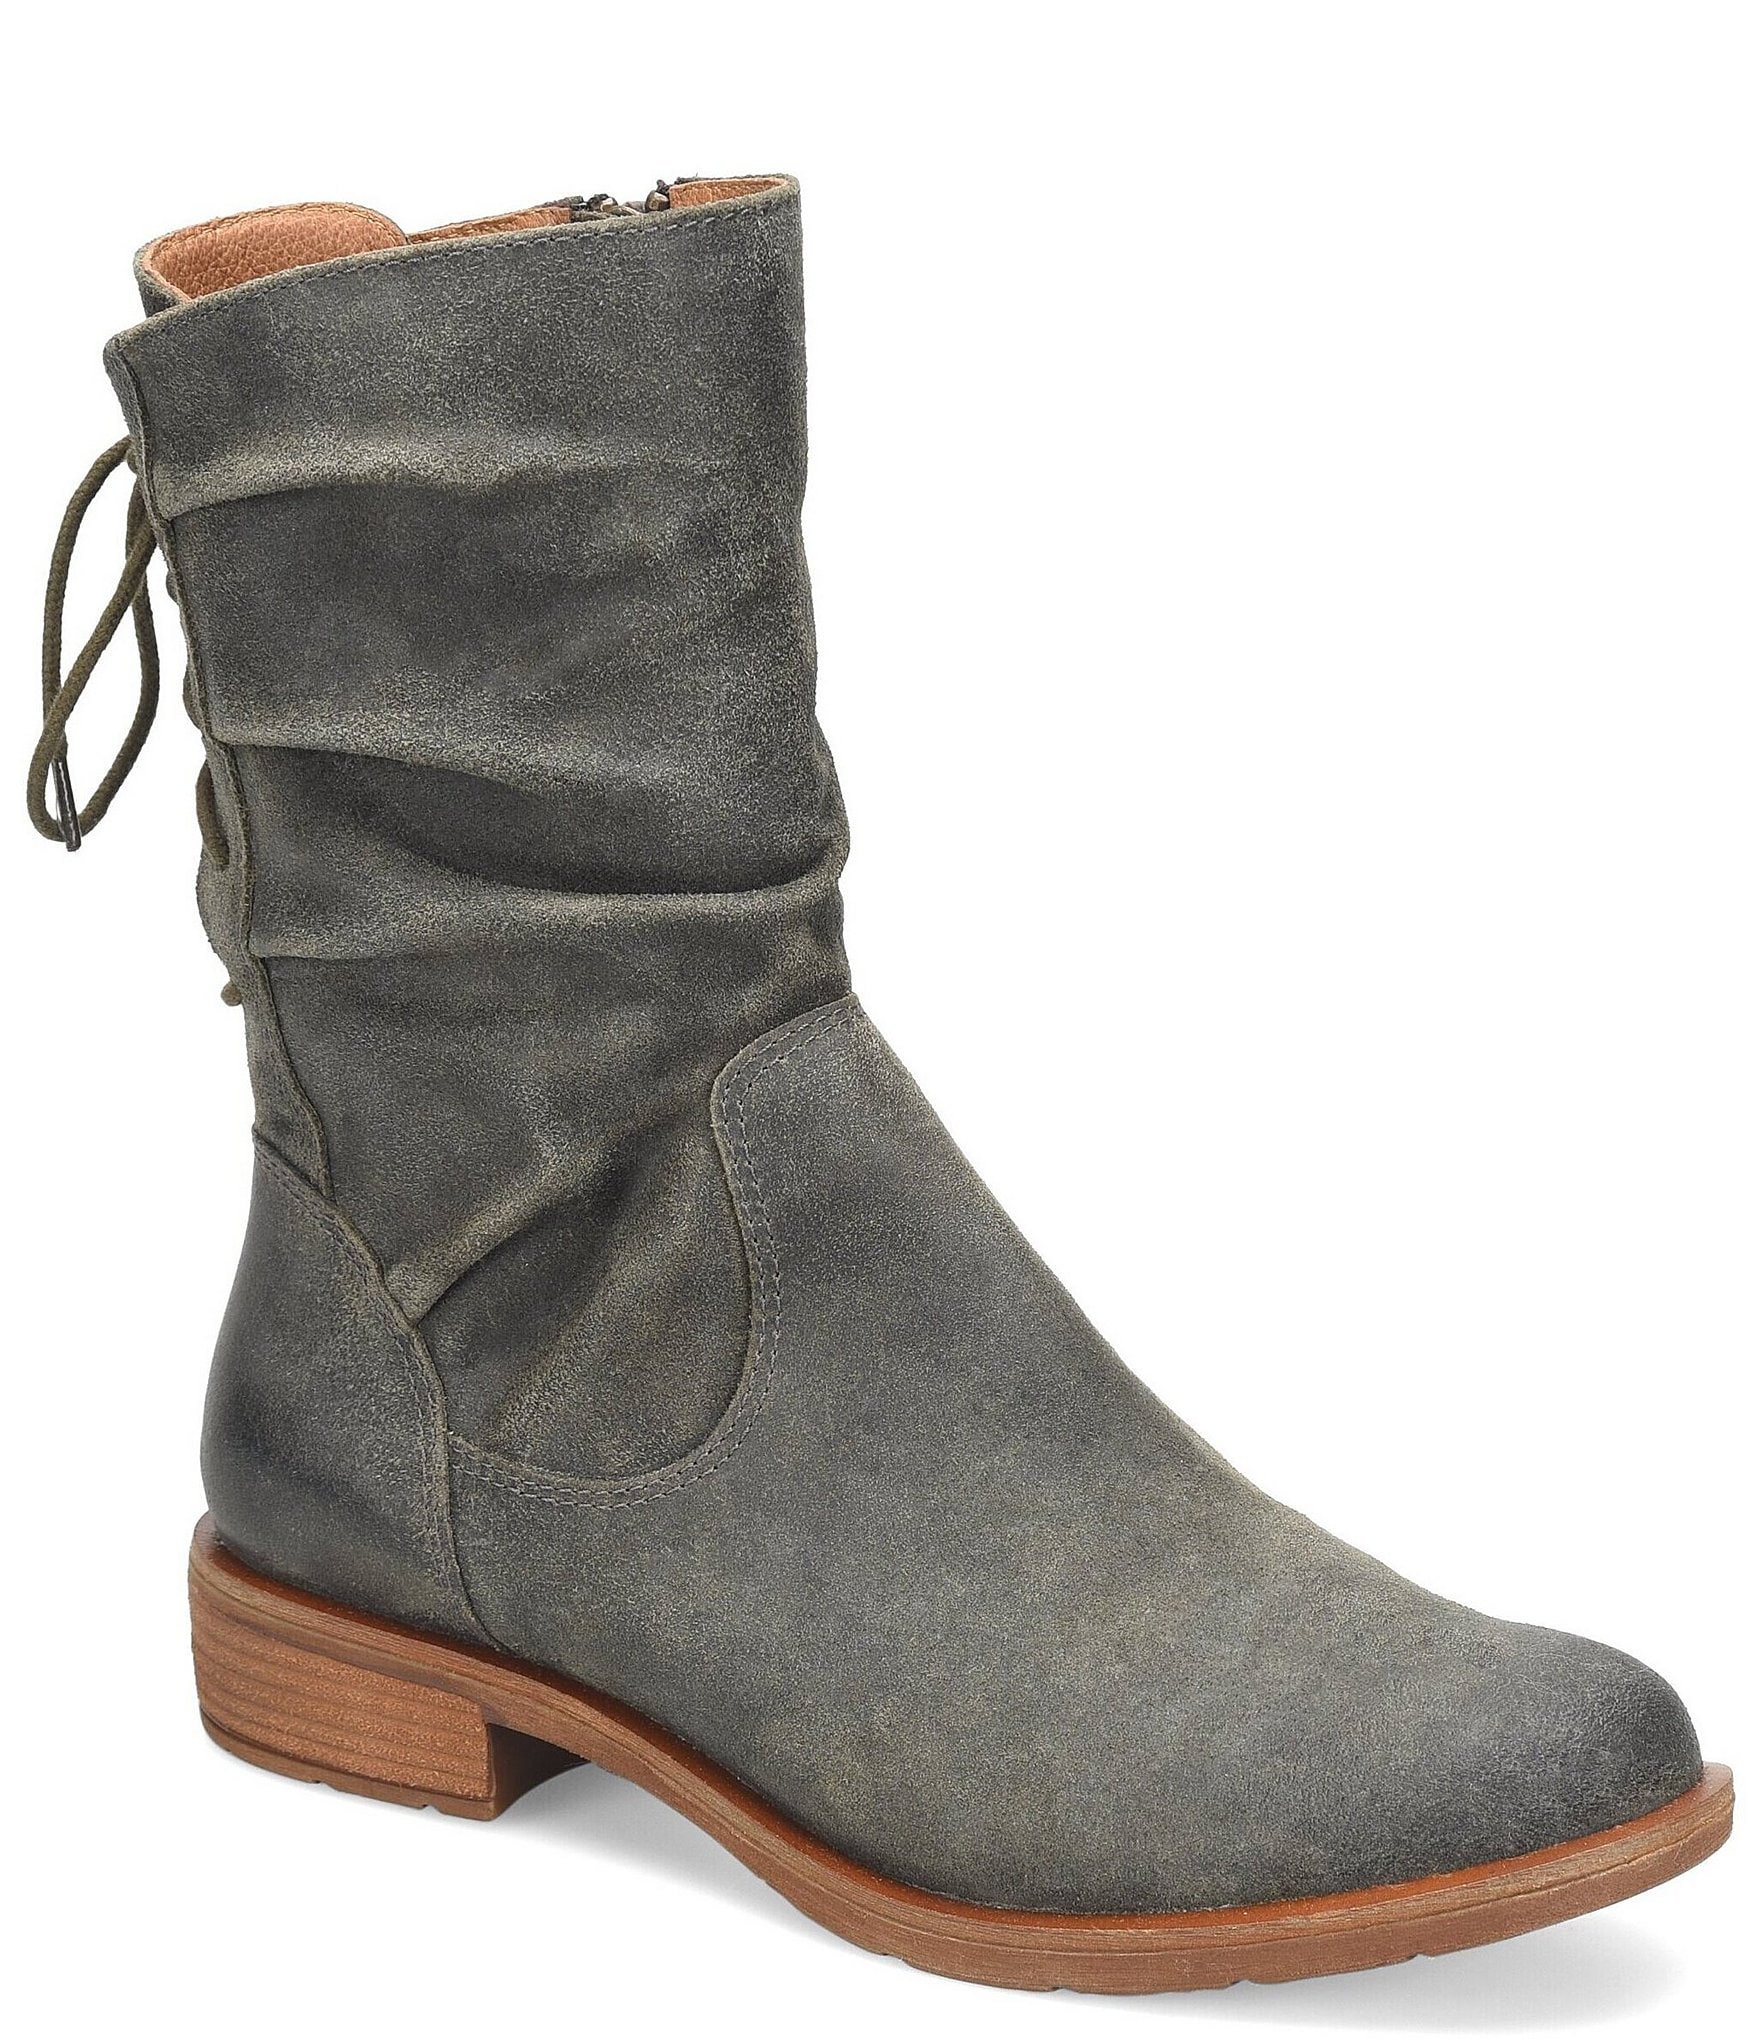 Sofft Sharnell Low Waterproof Suede Lace-Up Back Zip Boots | Dillard's